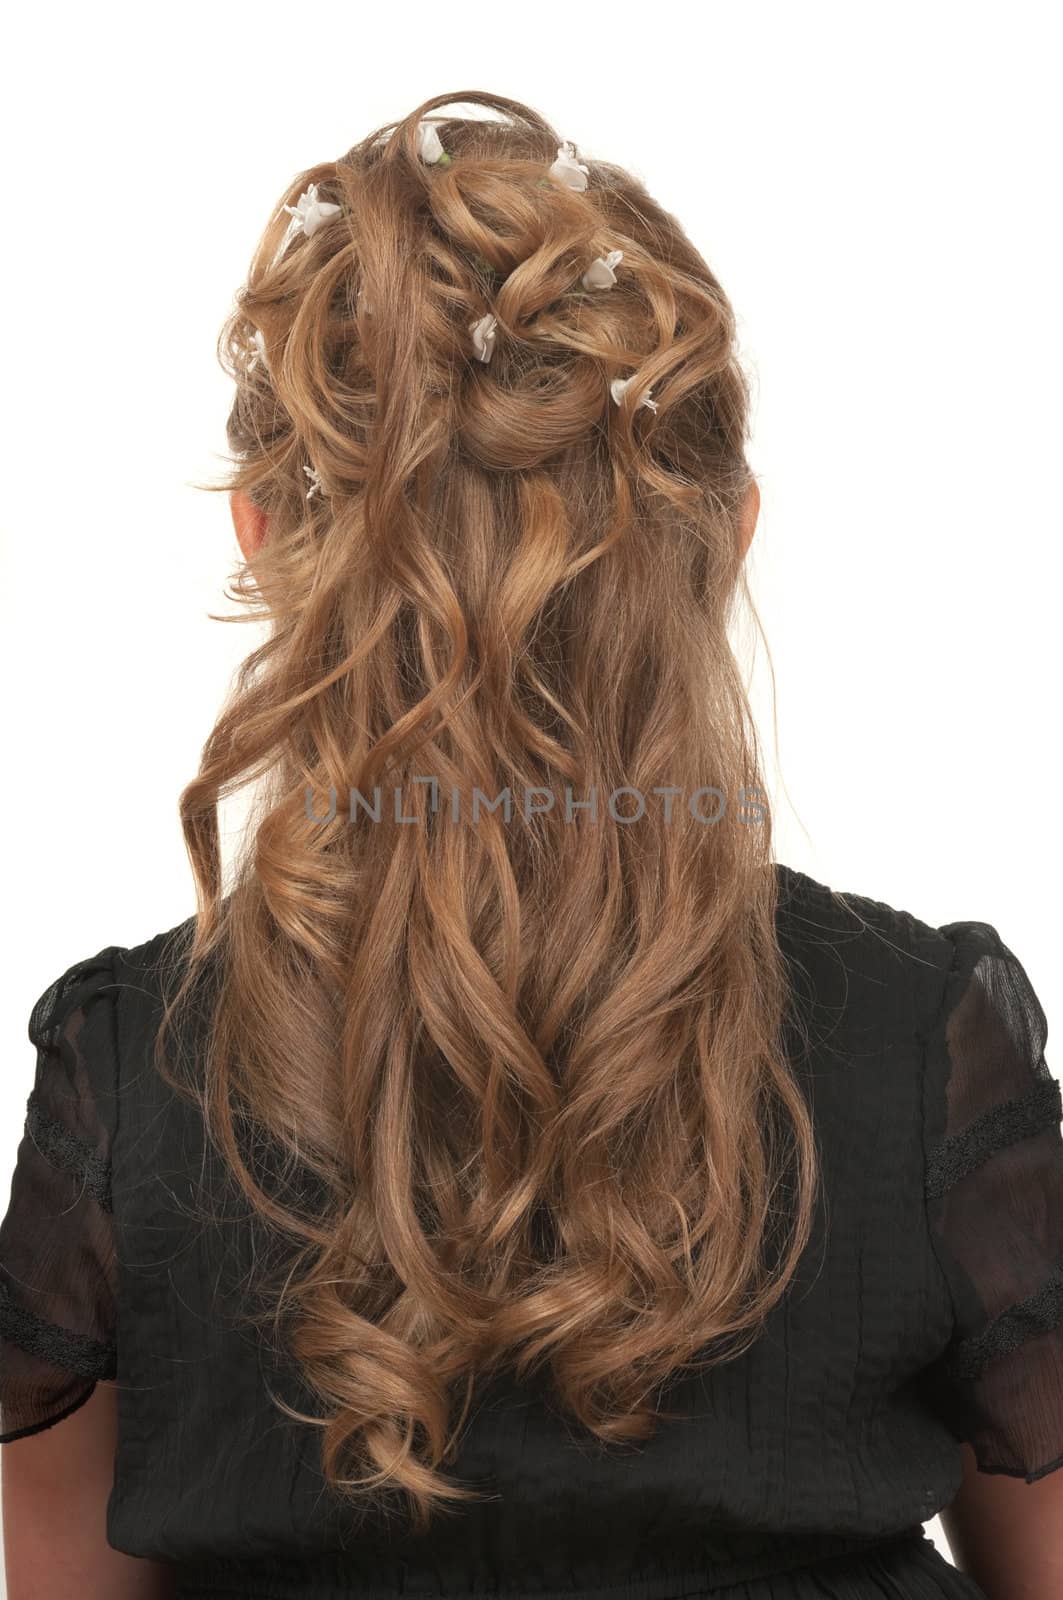 Hairdo for little girls for weddings or parties